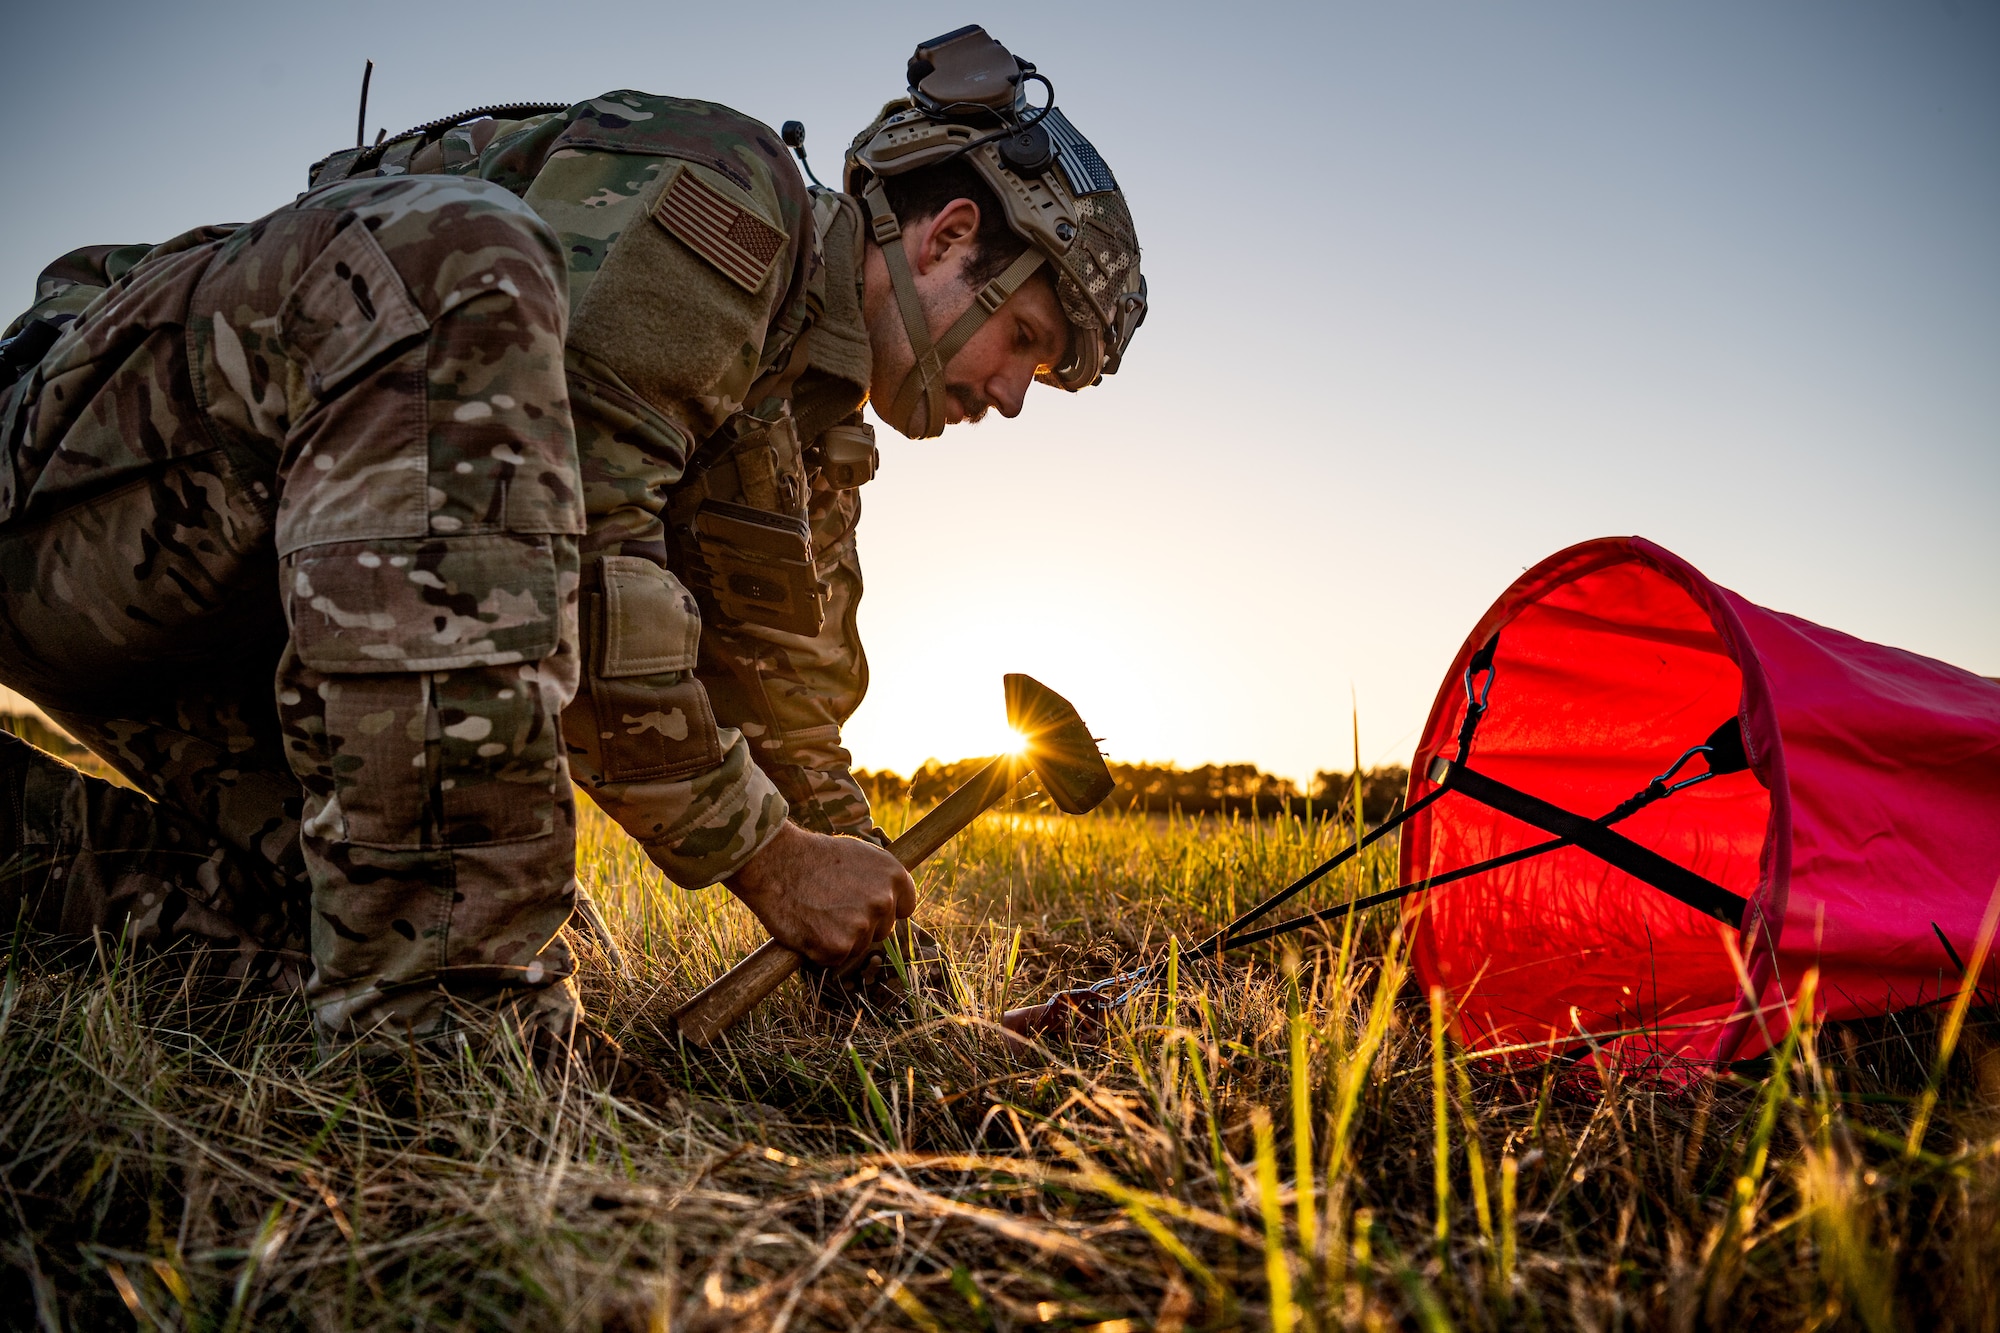 U.S. Air Force Tech. Sgt. Josh Griffith, 435th Contingency Response Squadron airborne air traffic controller, secures a visual airfield marking along the landing zone during exercise Agile Wolf 22 at Koszalin, Poland, Sept. 13, 2022. Visual markers are placed along the flightline to show the aircraft where it is safe to touchdown on a landing zone. (U.S. Air Force photo by Airman 1st Class Jared Lovett)